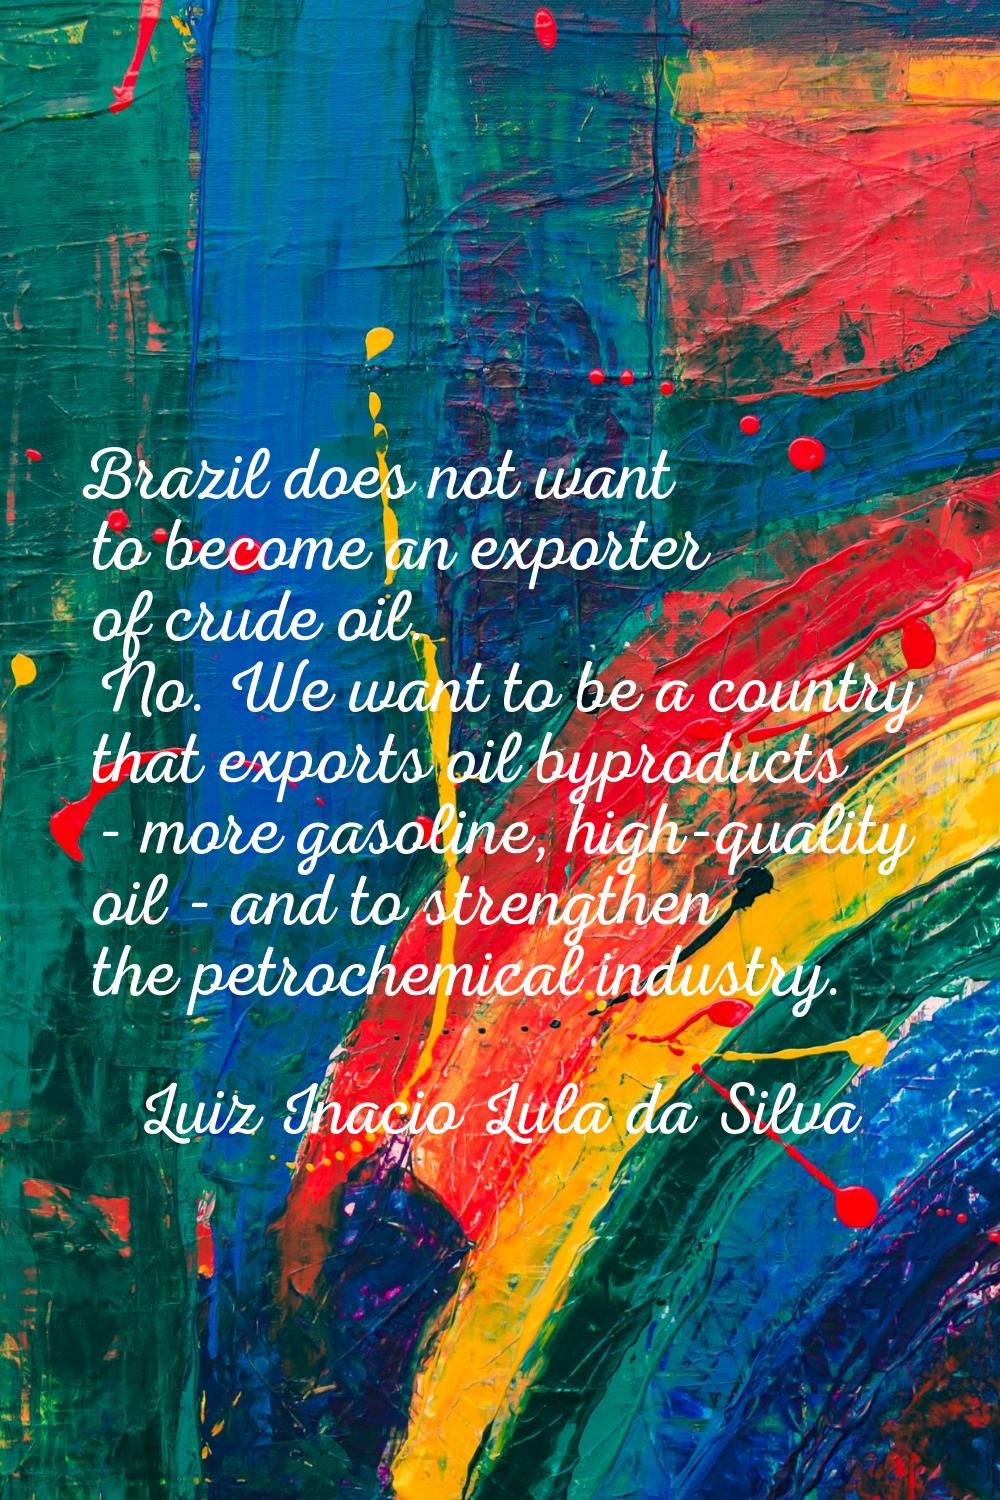 Brazil does not want to become an exporter of crude oil. No. We want to be a country that exports o